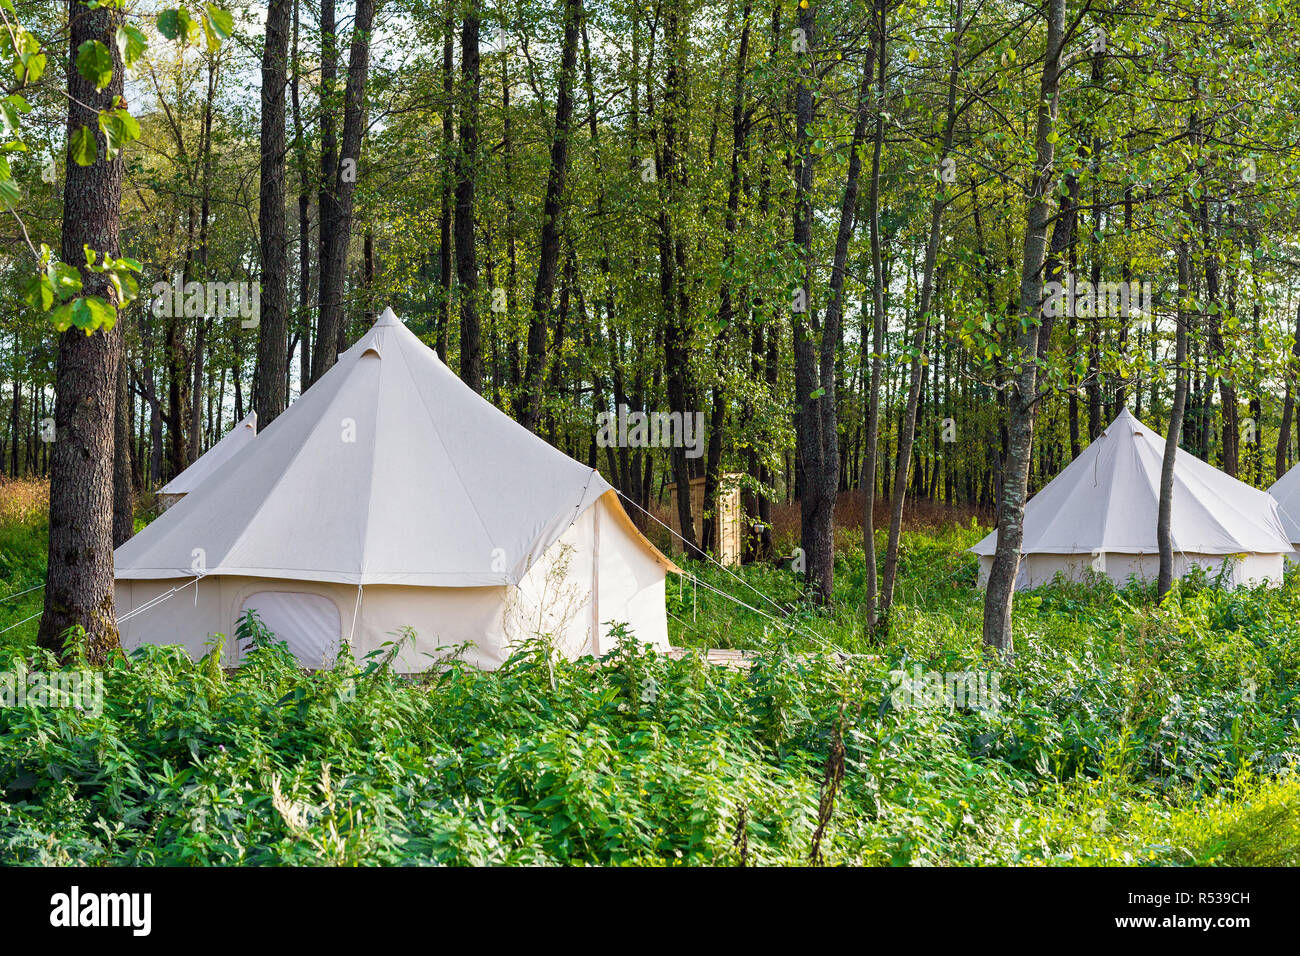 Group of glamping bell tents Stock Photo